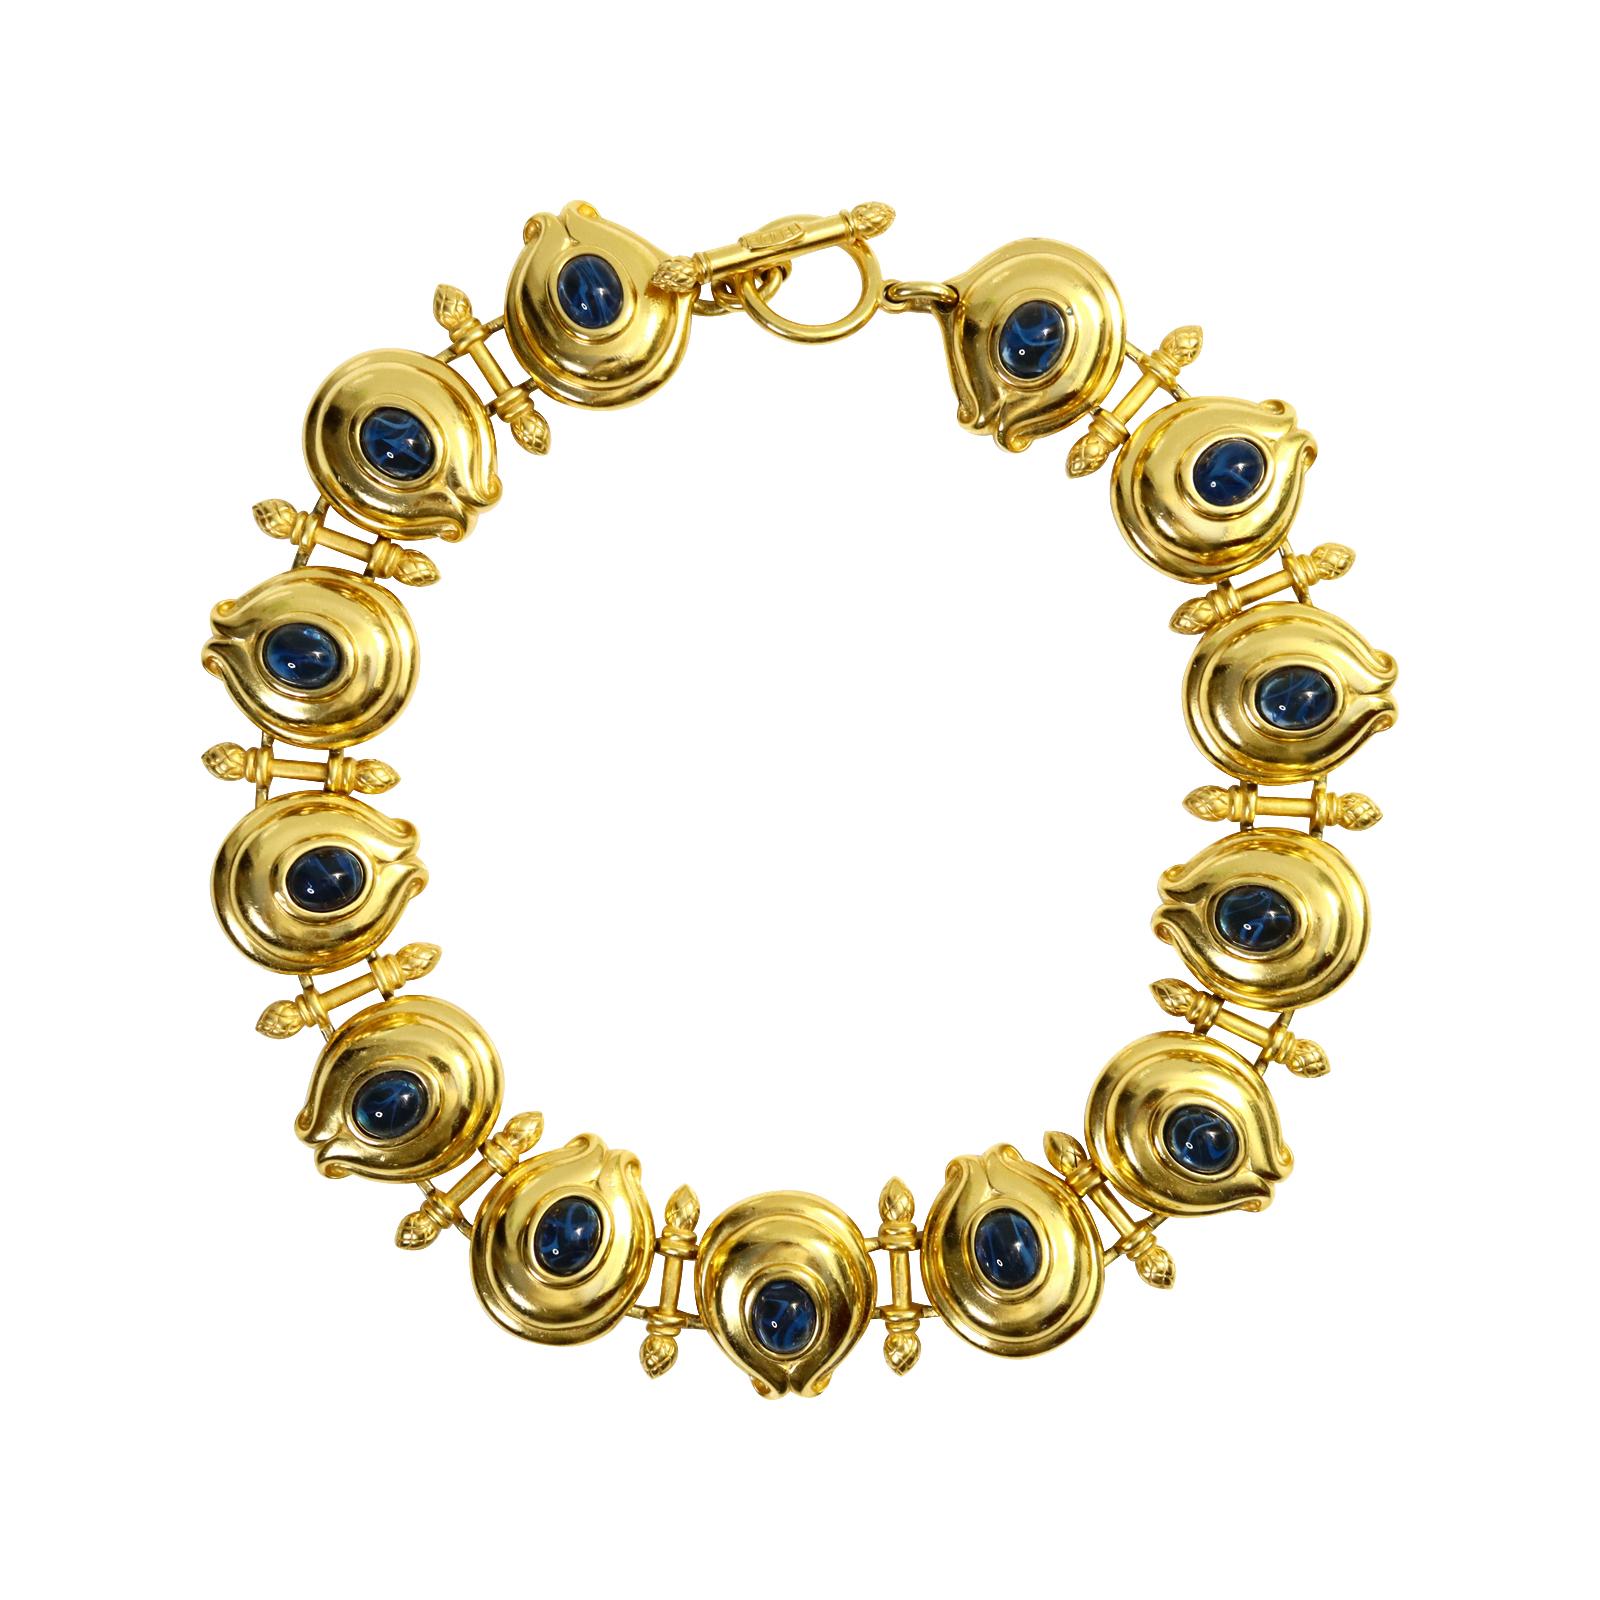 is fendi jewelry real gold